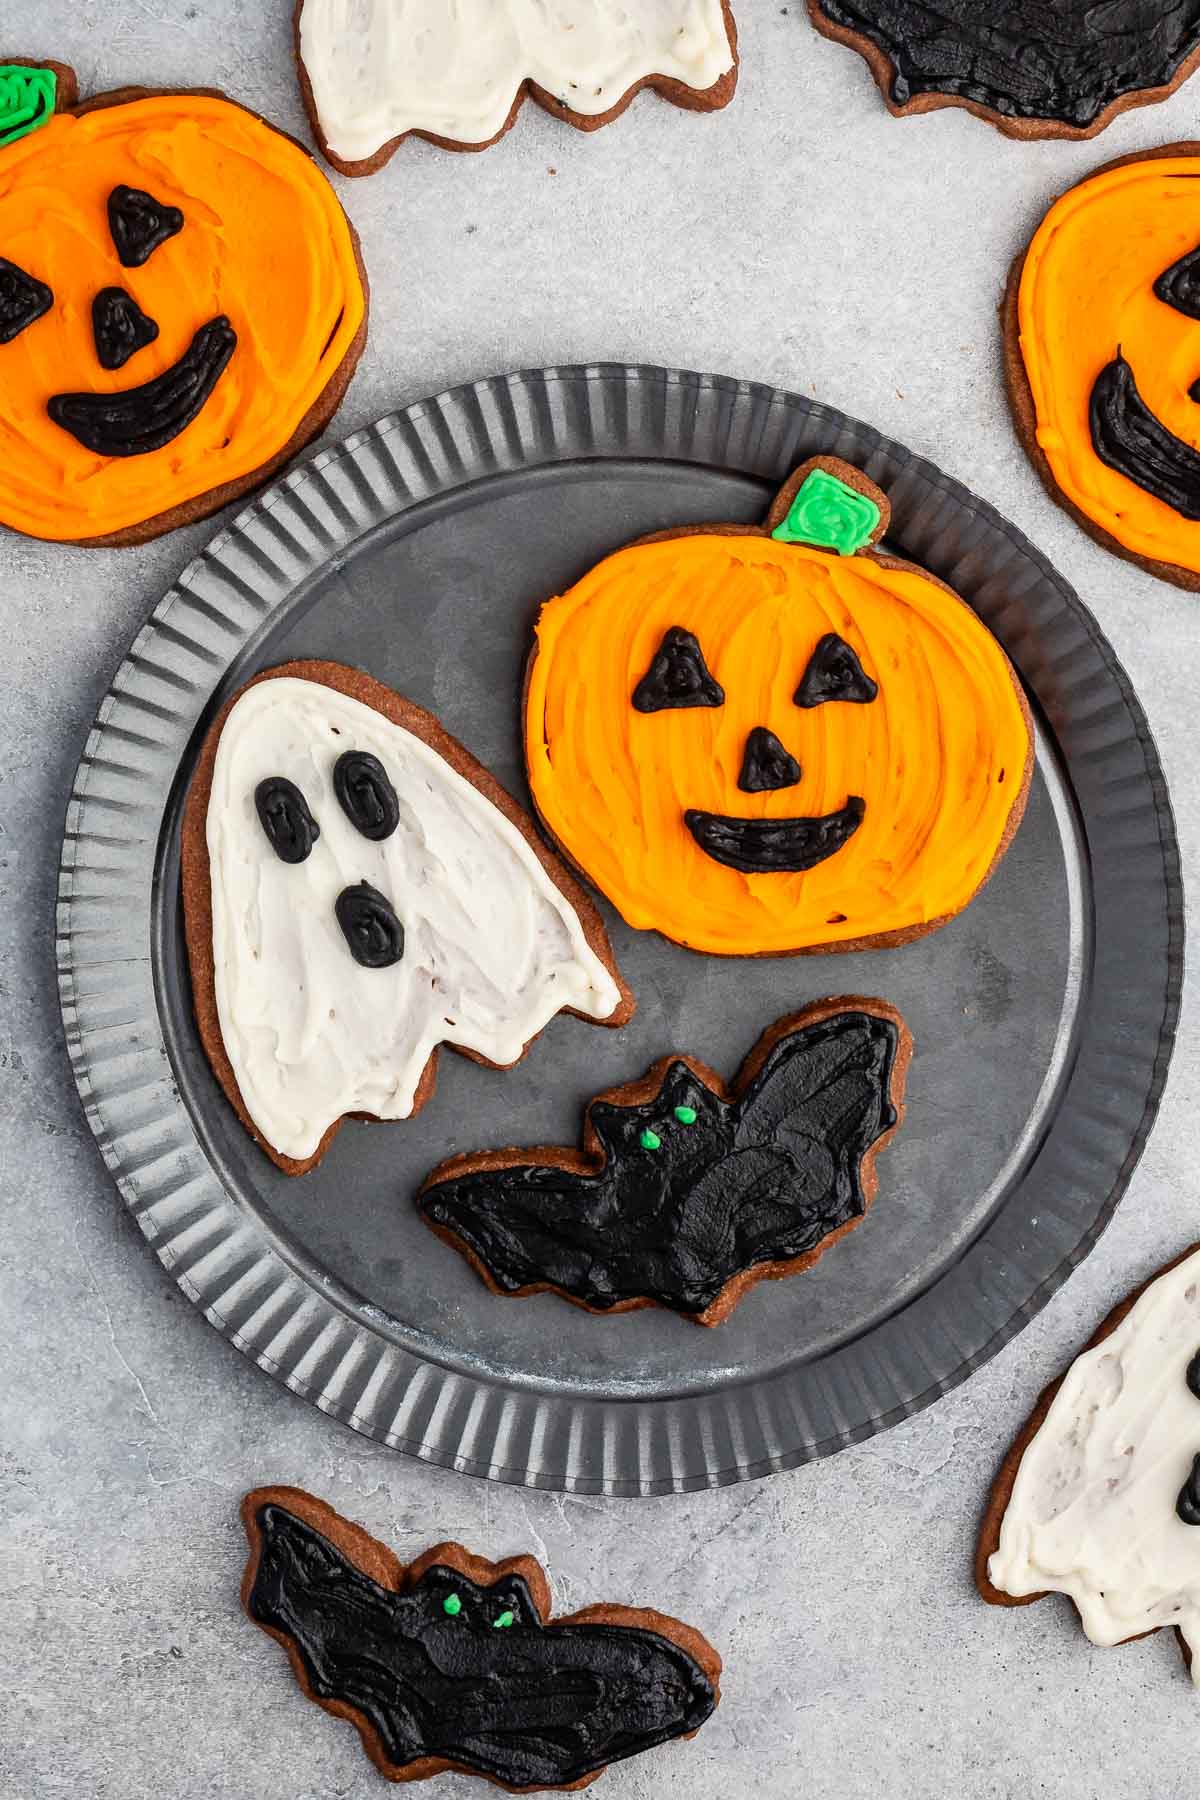 sugar cookies shaped like halloween characters and frosted with orange, white and black.